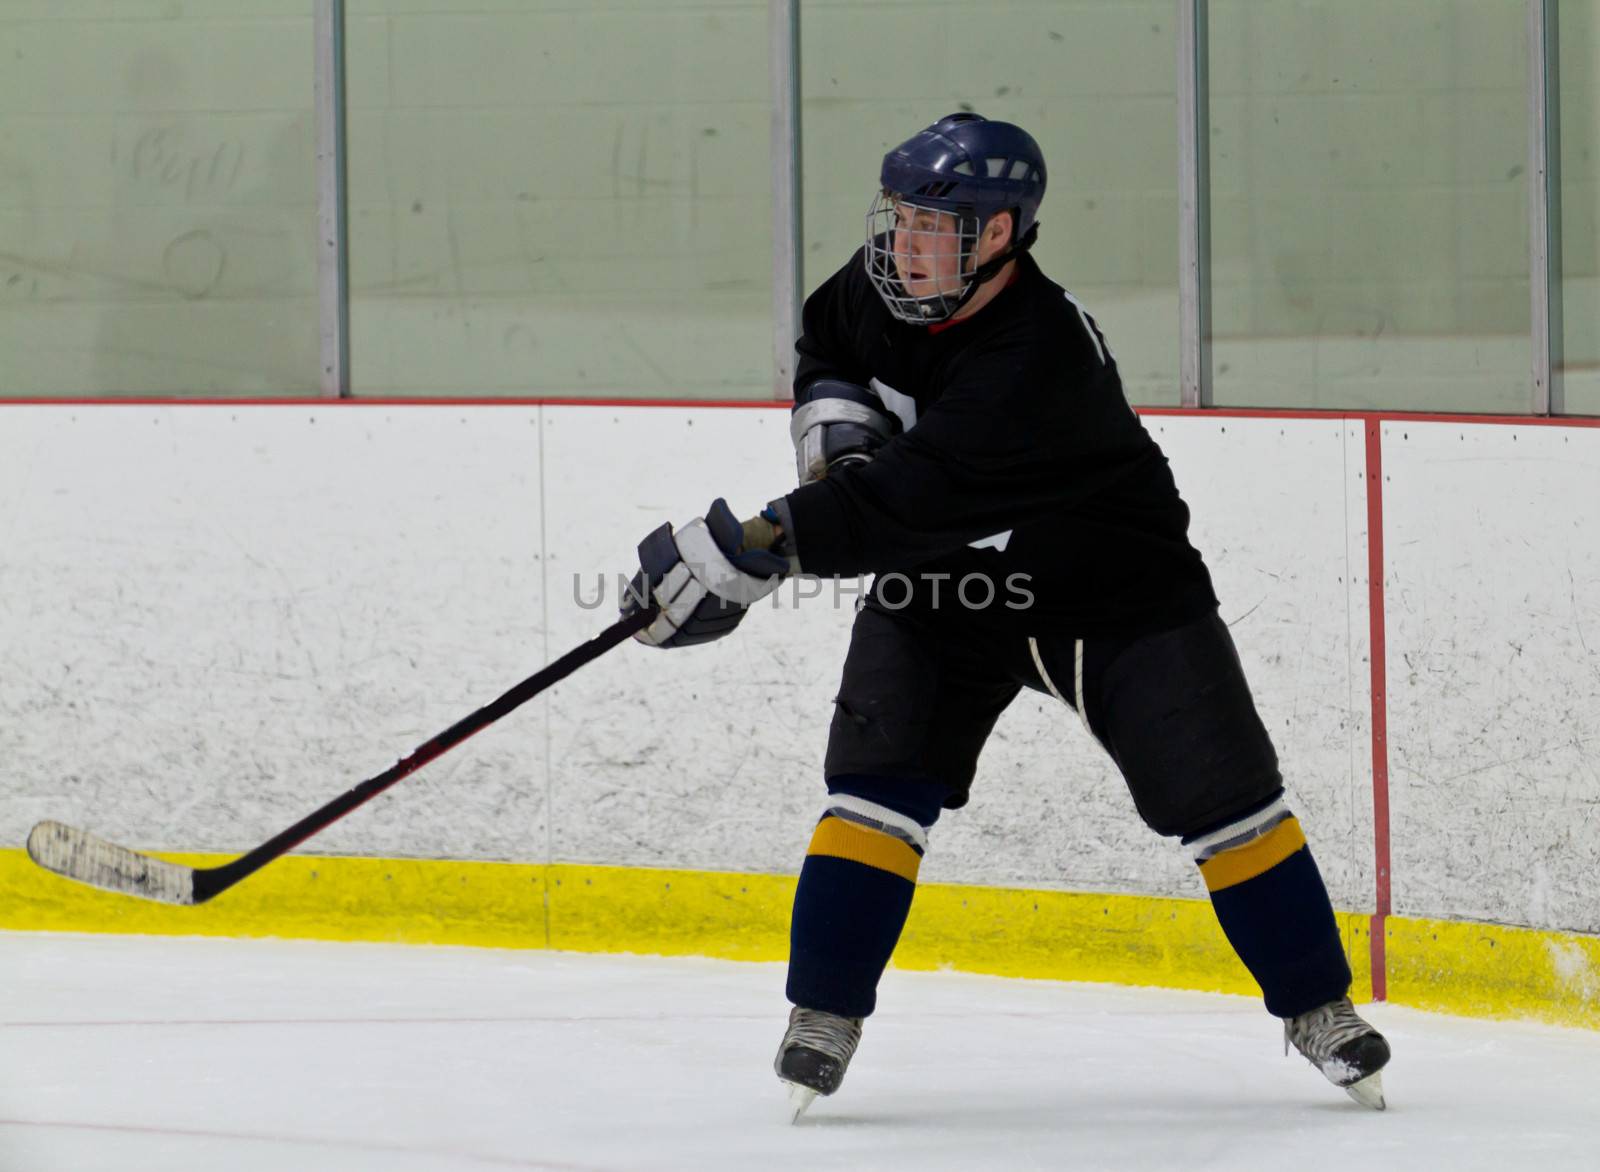 Hockey player taking a shot during a game by bigjohn36